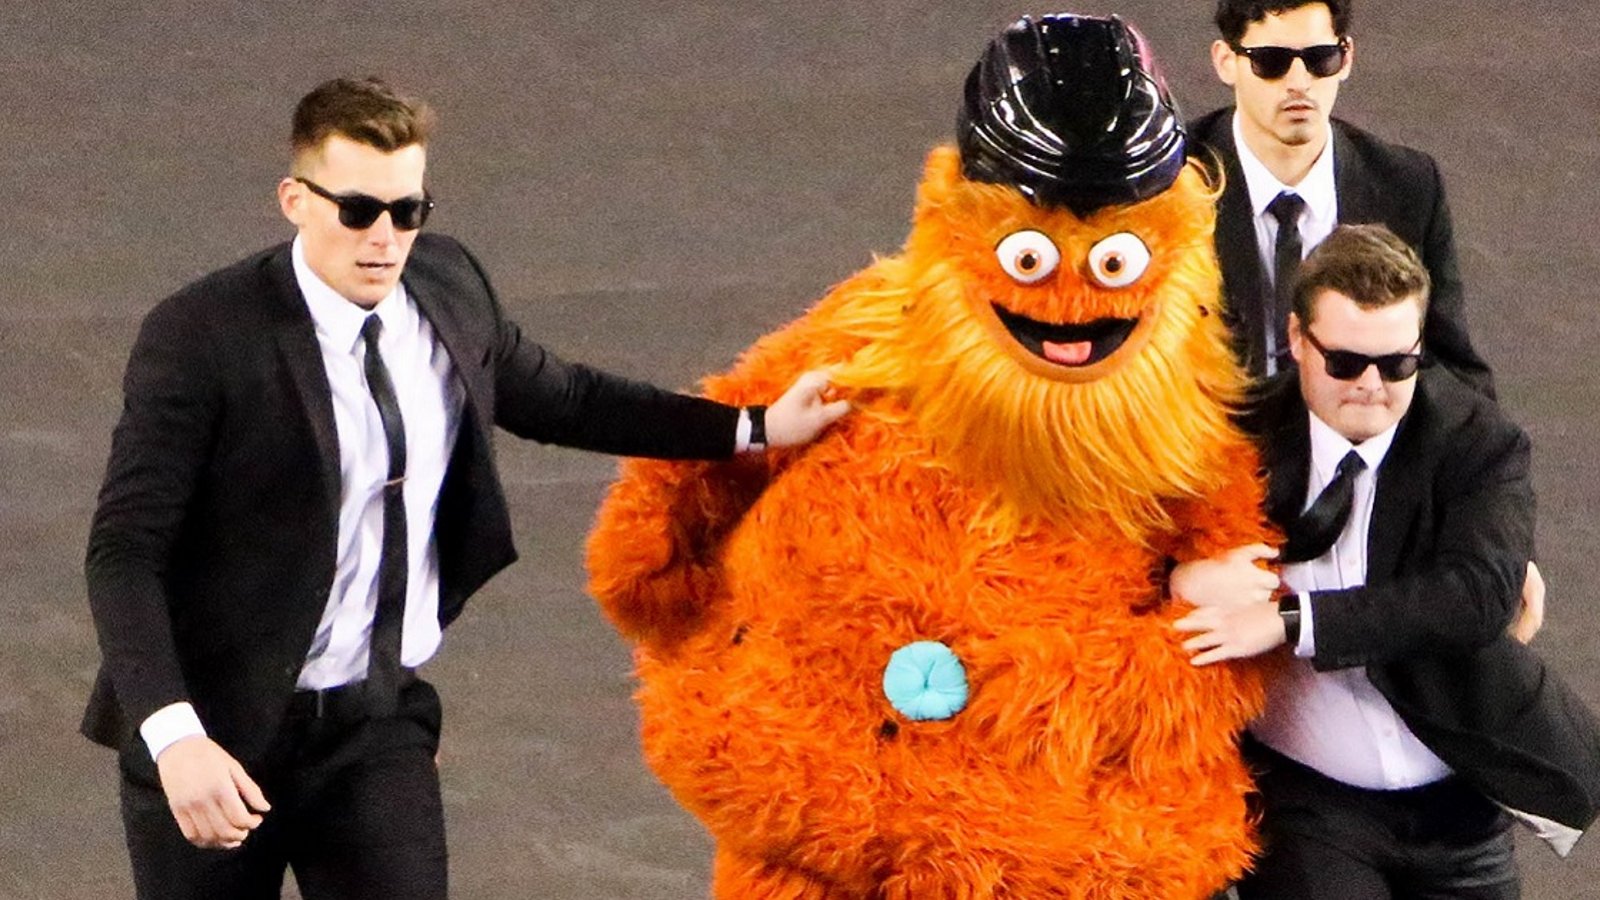 Chaos in Philadelphia as security tries to apprehend a streaking Gritty!